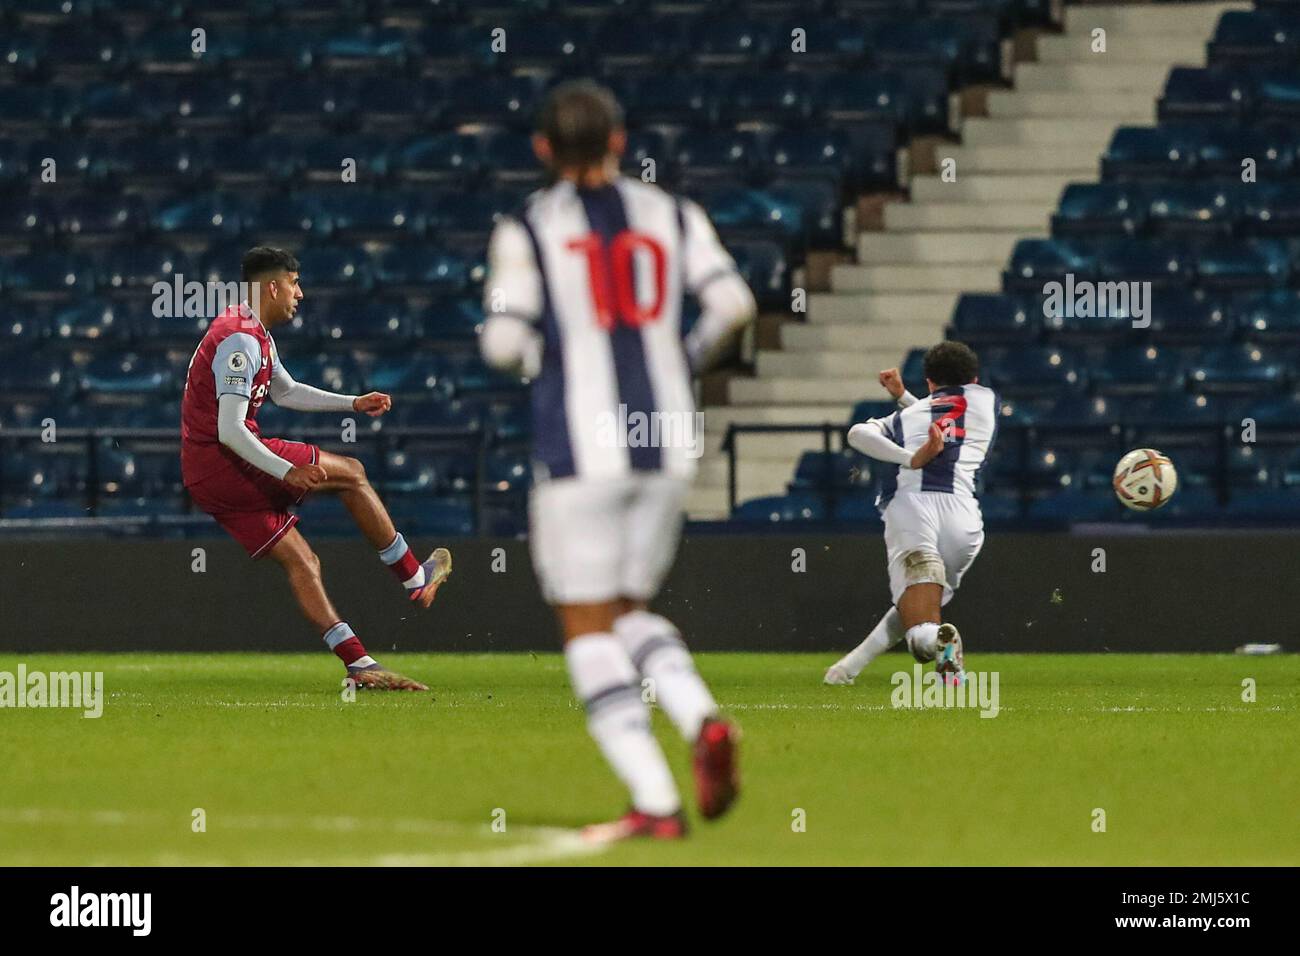 West Bromwich, UK. 27th Jan, 2023. Arjan Raikhy #55 of Aston Villascores a goal to make it 0-3 during the Premier League 2 U23 match West Bromwich Albion U23 vs Aston Villa U23 at The Hawthorns, West Bromwich, United Kingdom, 27th January 2023 (Photo by Gareth Evans/News Images) Credit: News Images LTD/Alamy Live News Stock Photo